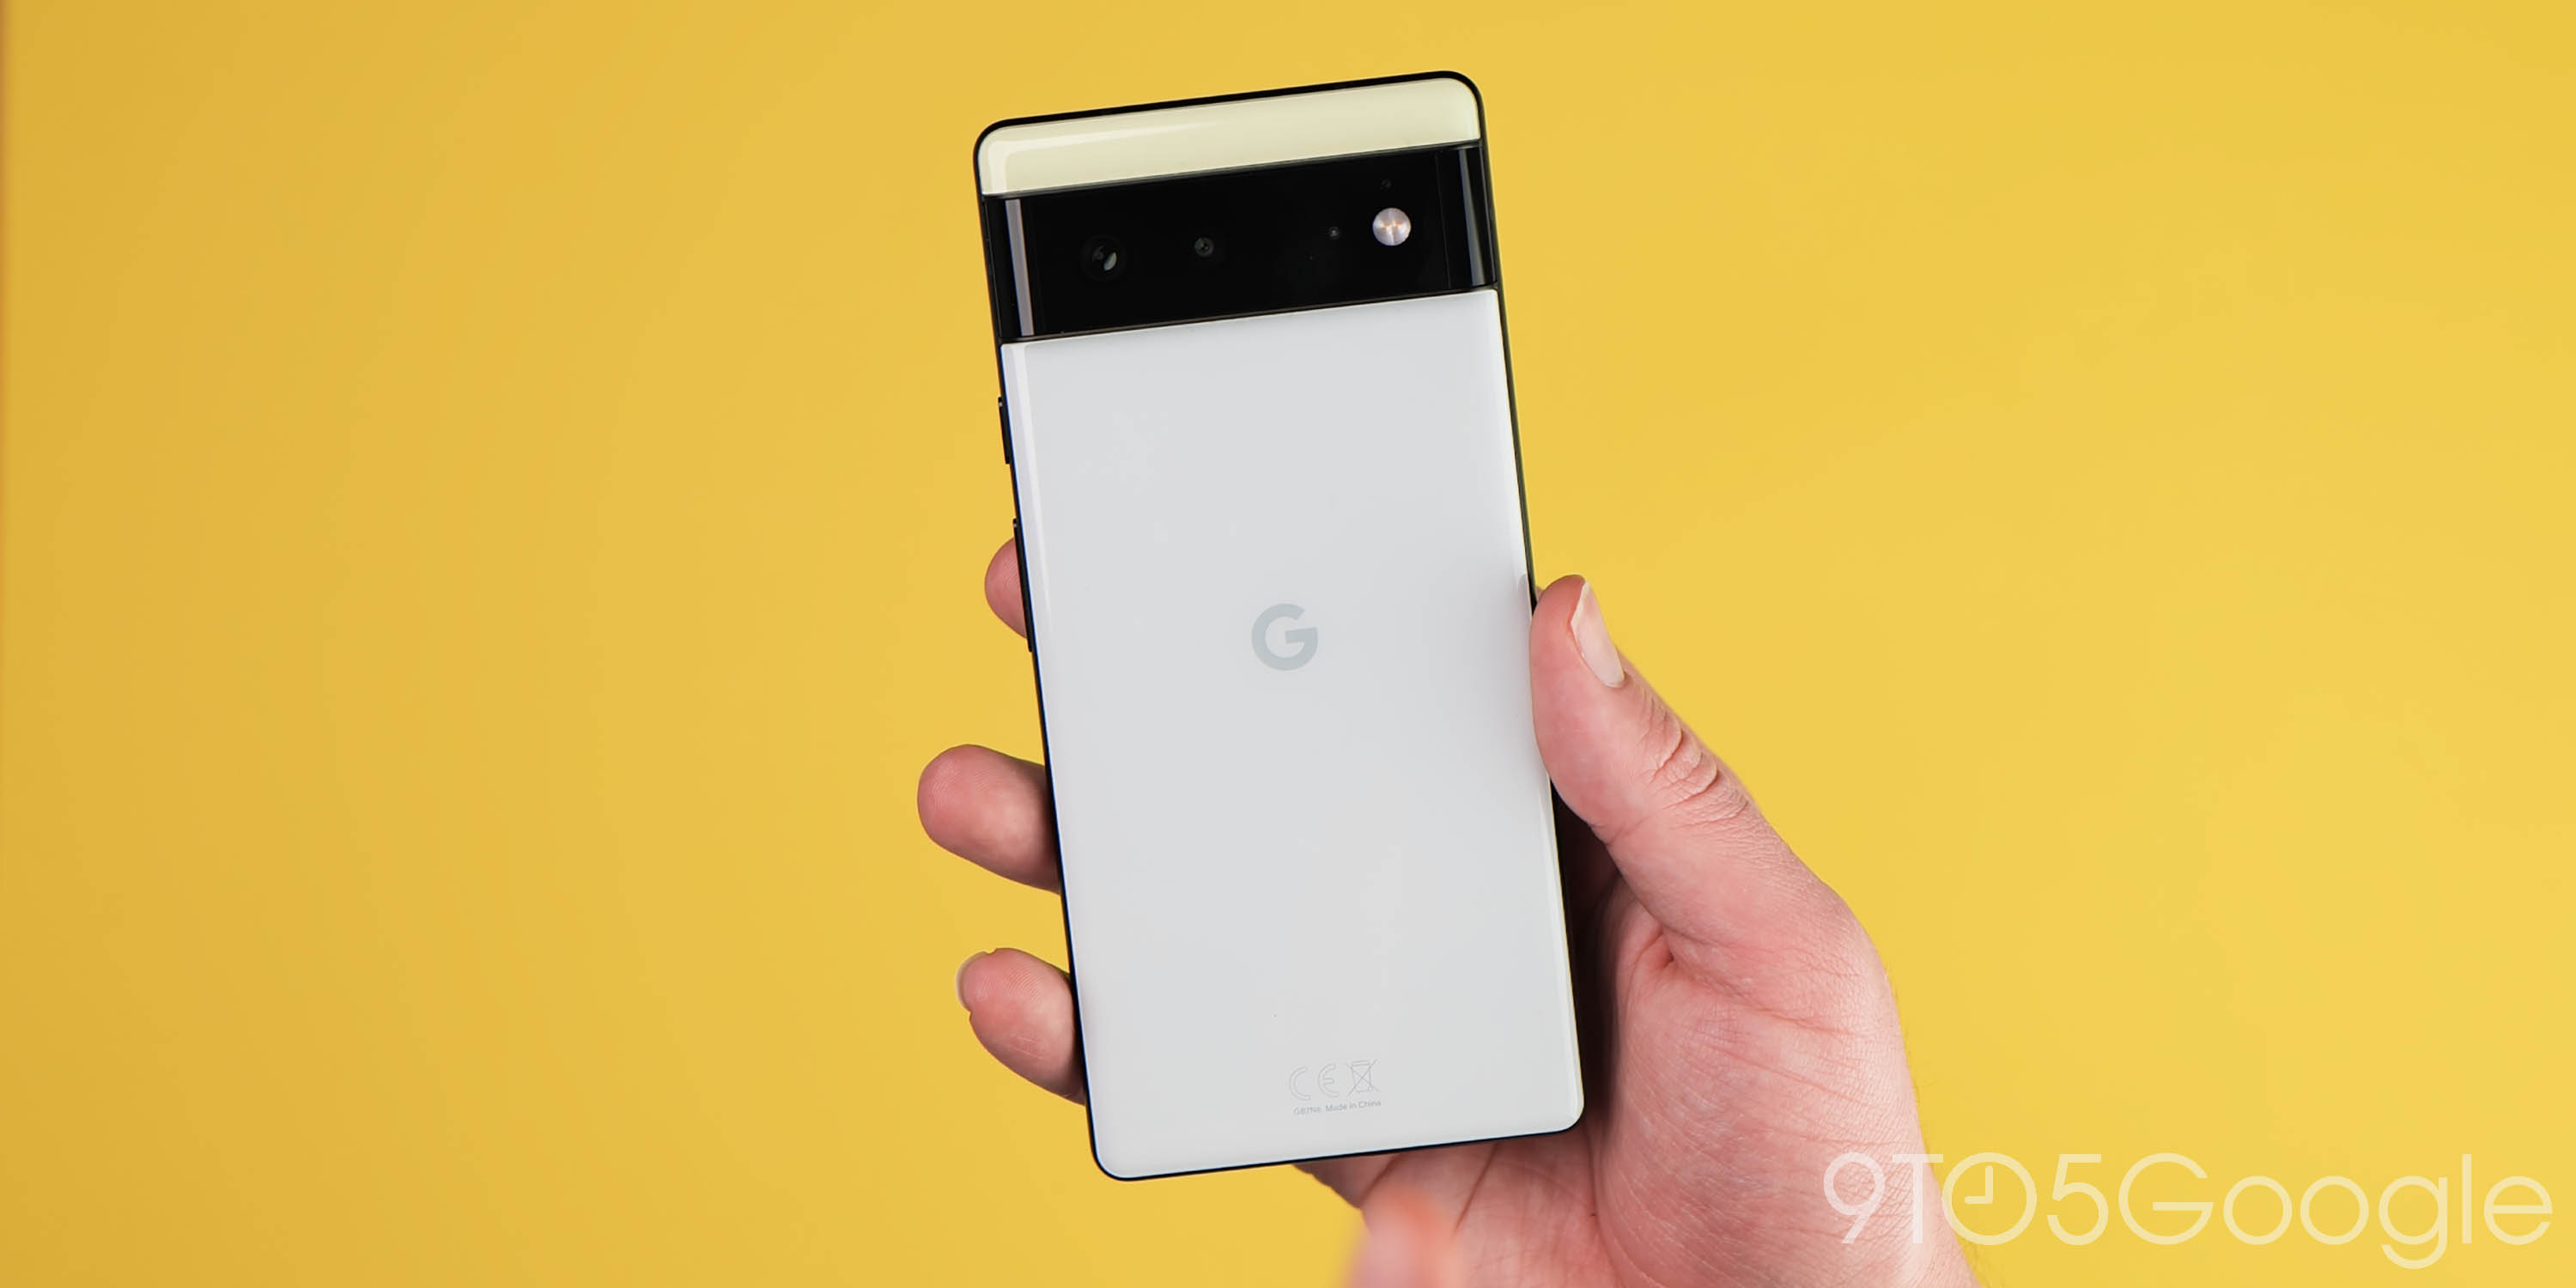 The Pixel 6 is highly likely to be succeeded by the Pixel 7 which we expect Google to launch in 2022.